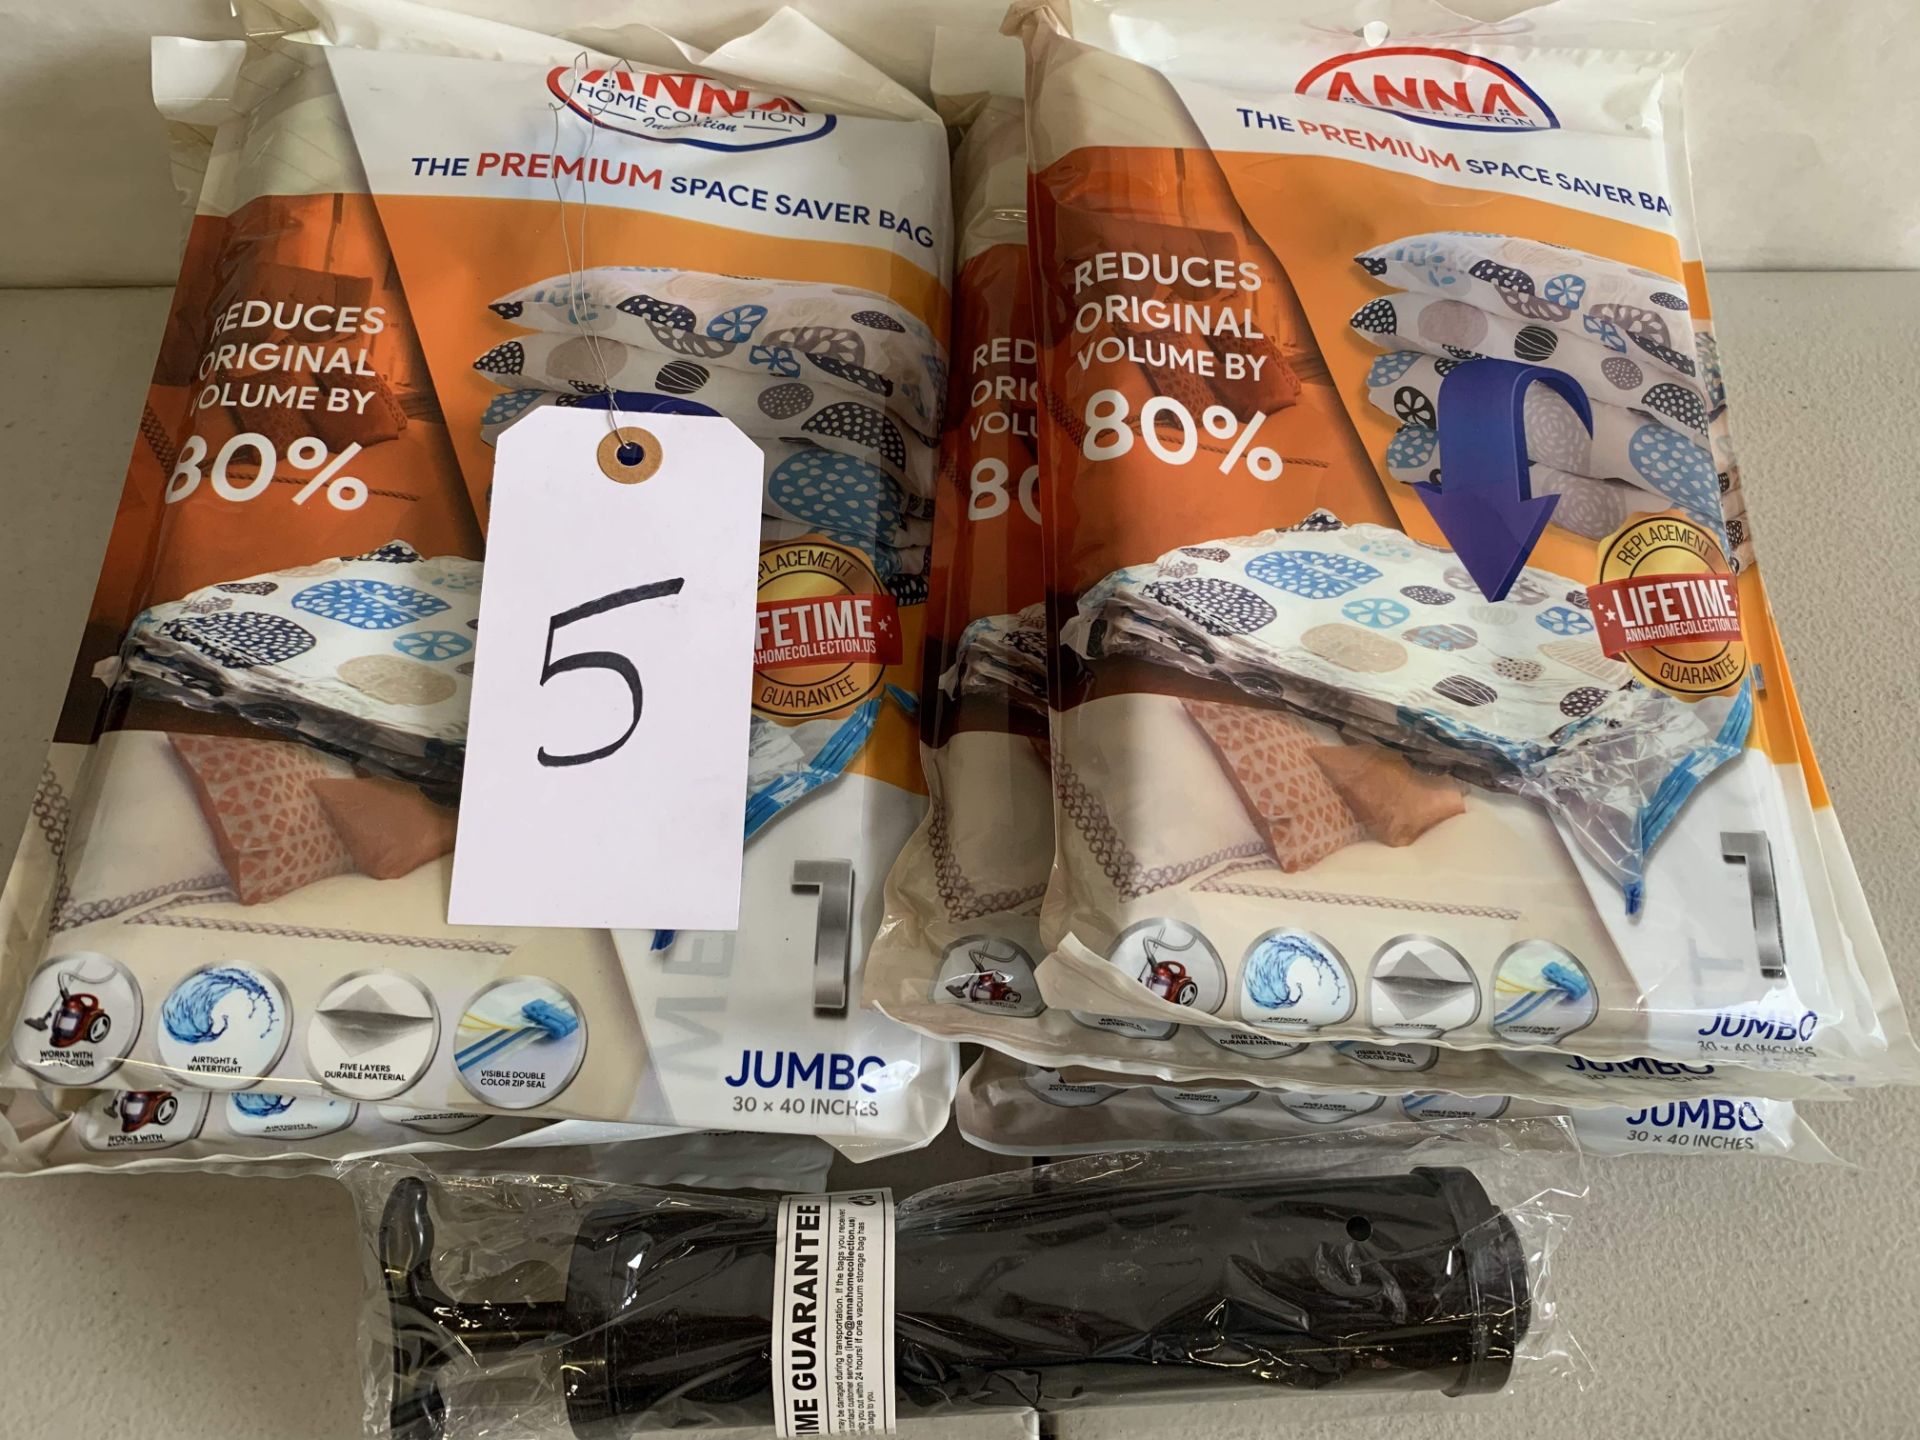 Anna Home Collection 6 Jumbo Space Saver Bags and a Pump (7 pcs)